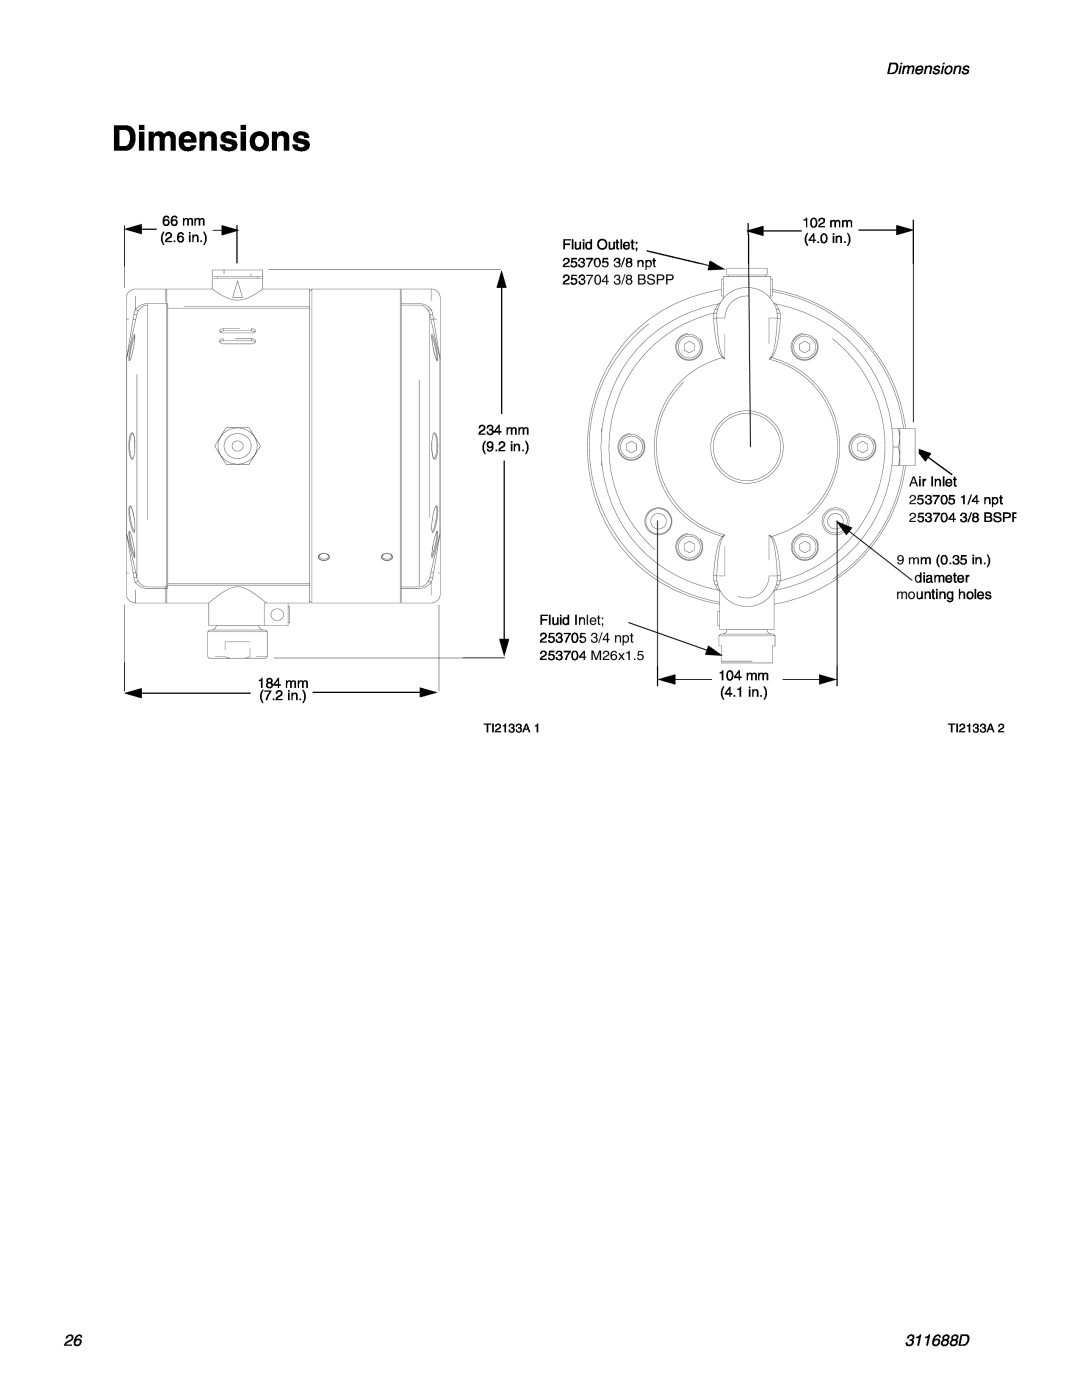 Graco 3D150 important safety instructions Dimensions, TI2133A 